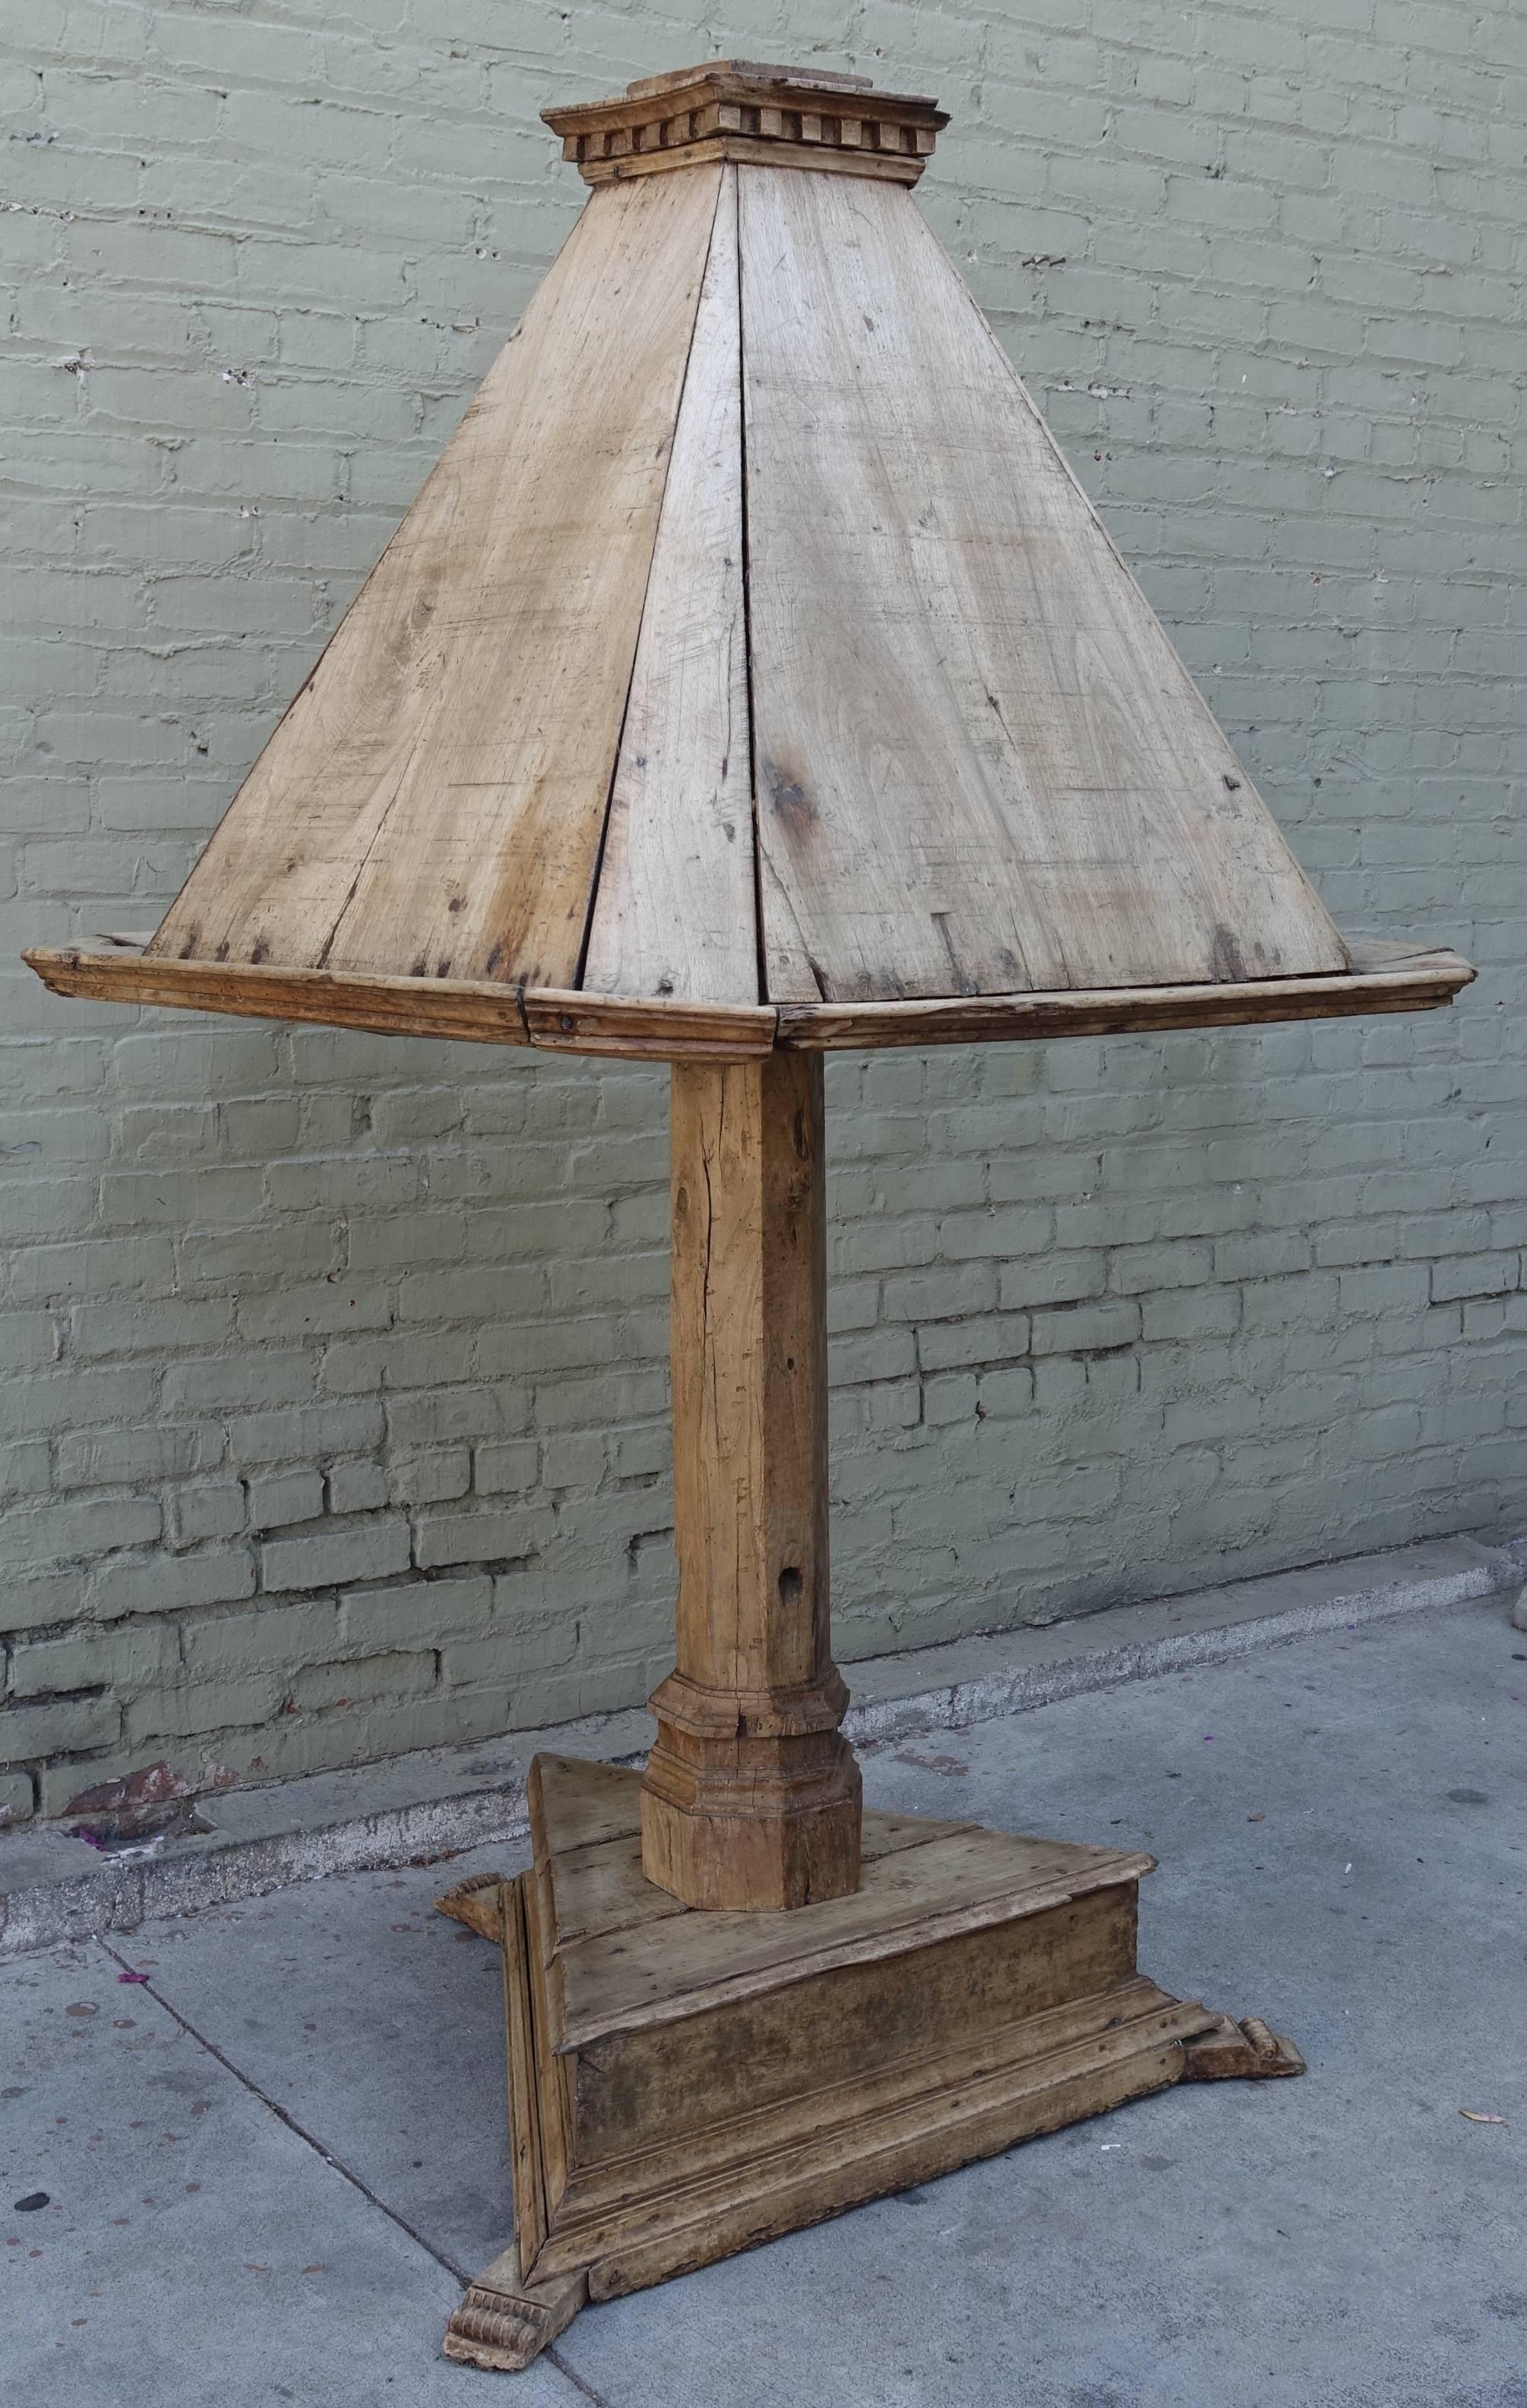 19th century Spanish walnut lectern/music stand hand made in three separate pieces that easily assemble.